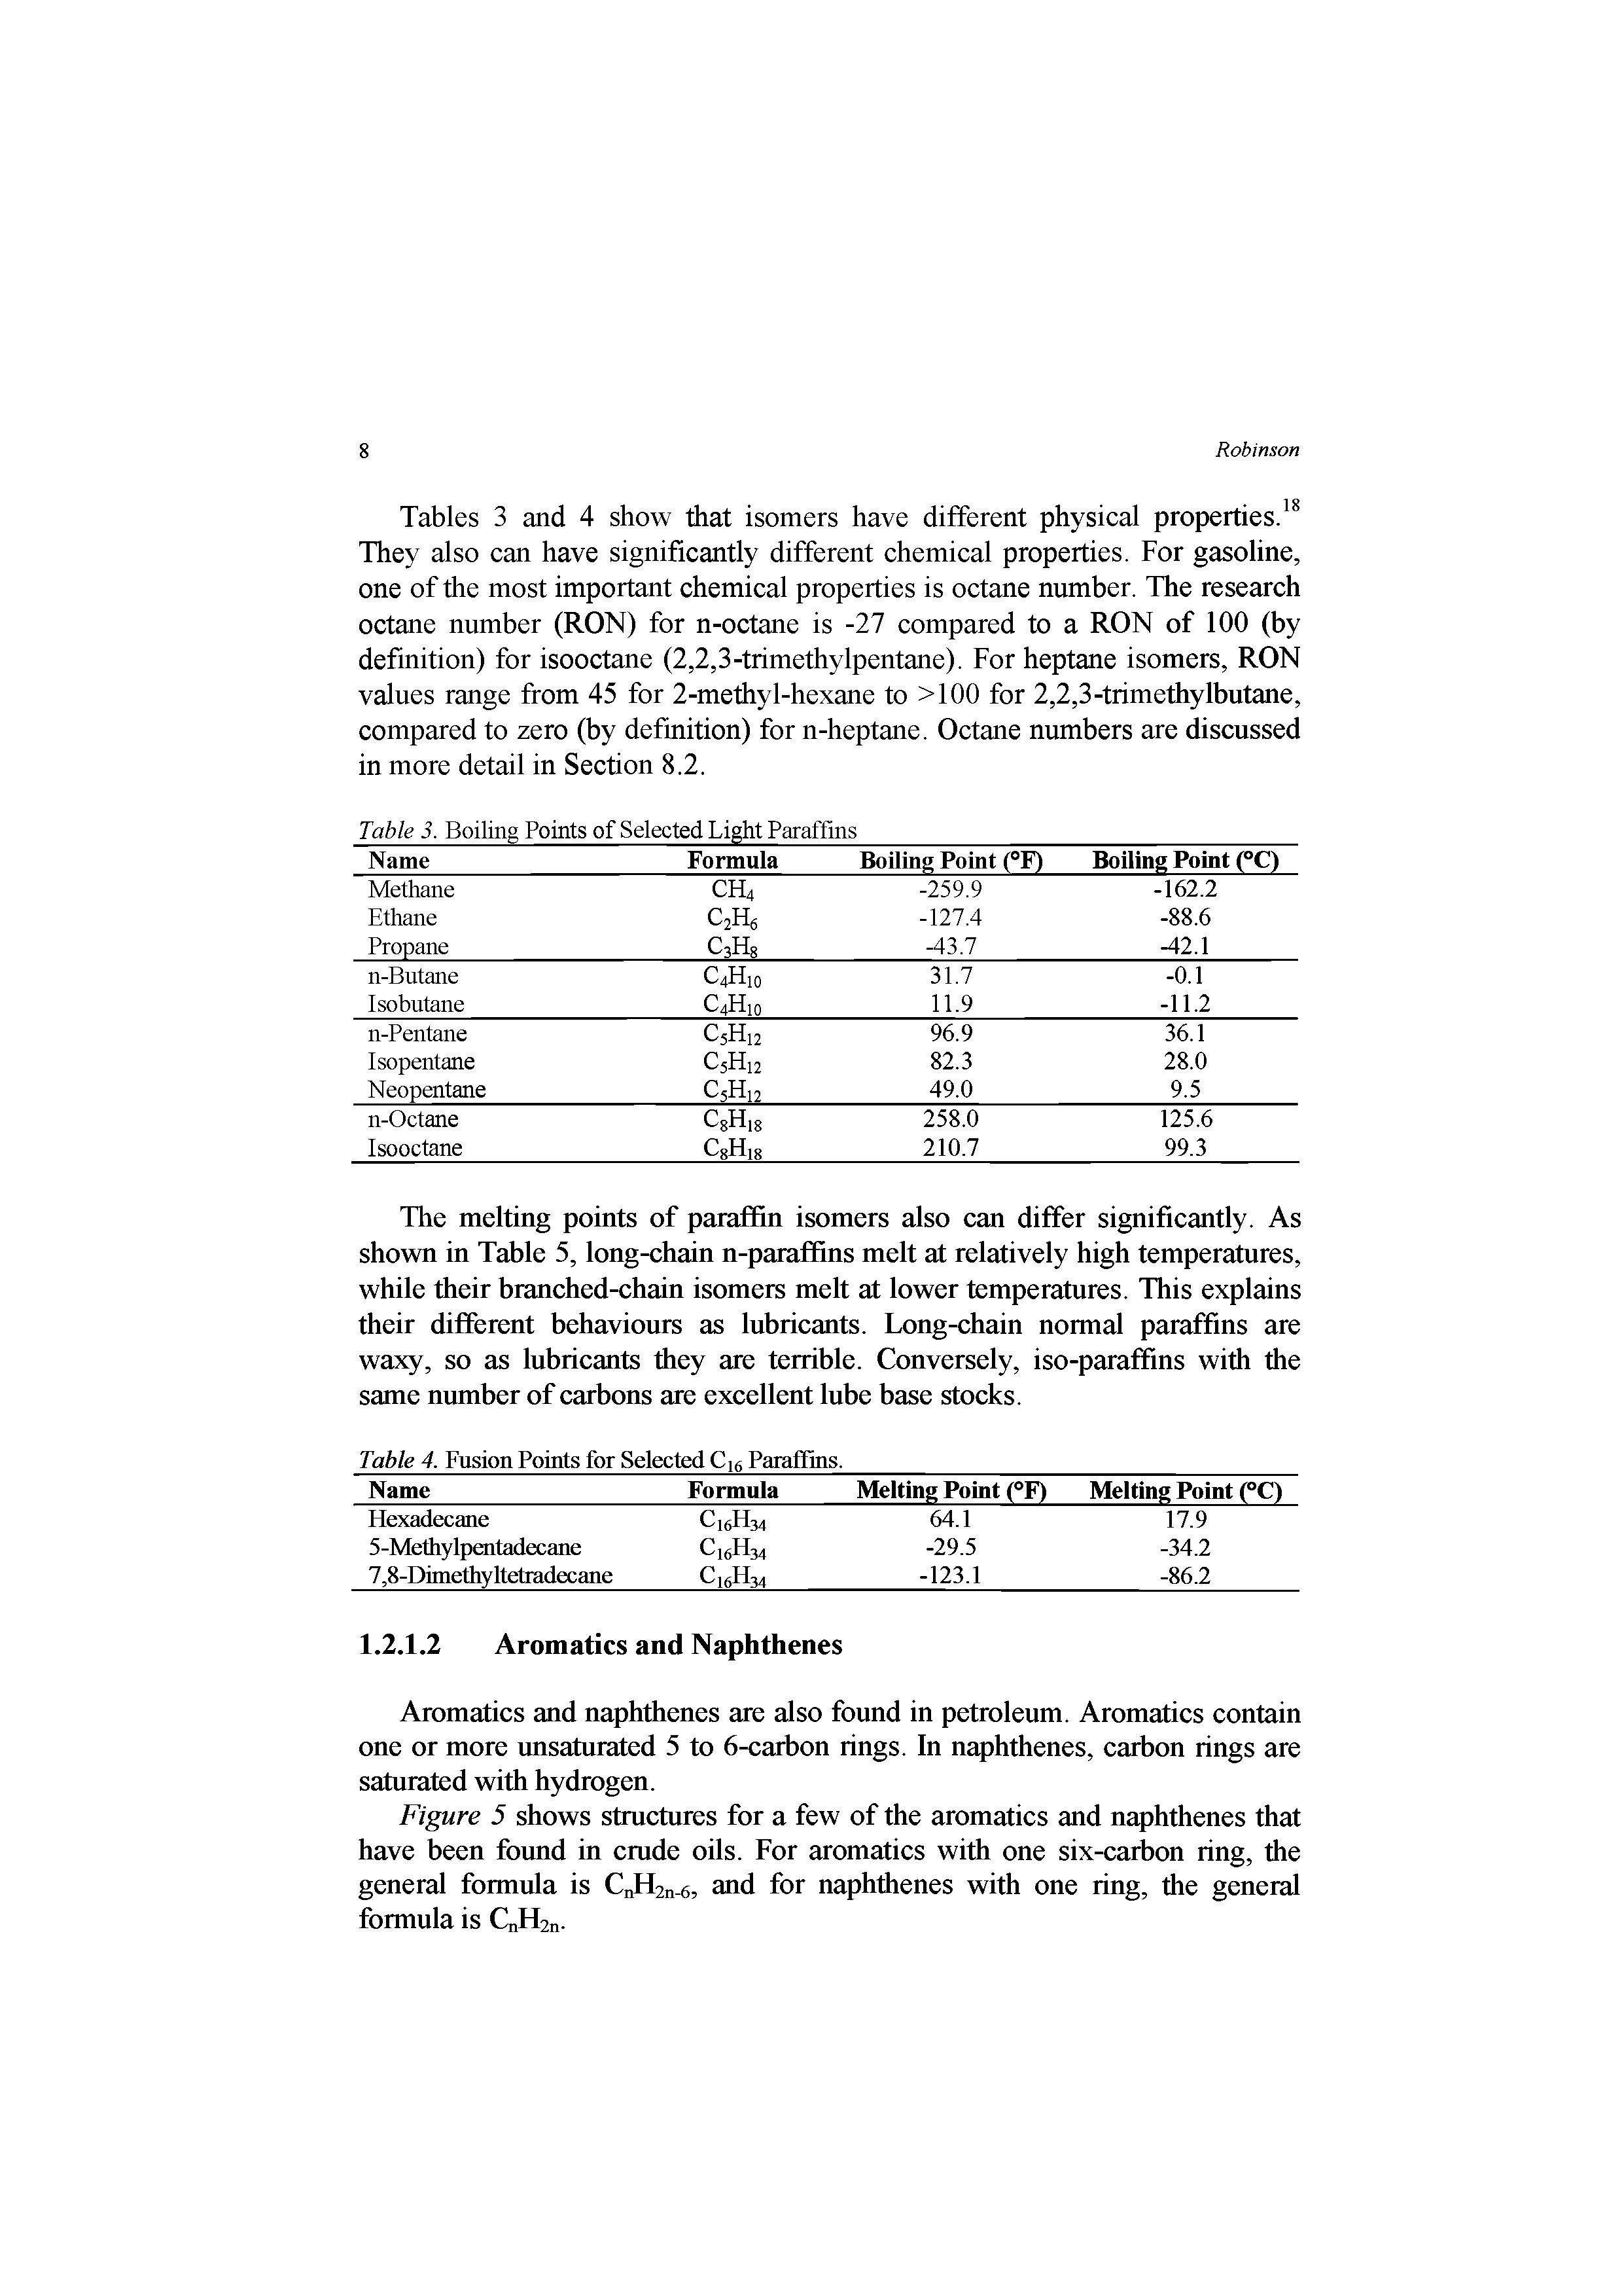 Tables 3 and 4 show that isomers have different physical properties. They also can have significantly different chemical properties. For gasoline, one of the most important chemical properties is octane munber. The research octane number (RON) for n-octane is -27 compared to a RON of 100 (by definition) for isooctane (2,2,3-trimethylpentane). For heptane isomers, RON values range from 45 for 2-methyl-hexane to >100 for 2,2,3-trimethylbutane, compared to zero (by definition) for n-heptane. Octane numbers are discussed in more detail in Section 8.2.